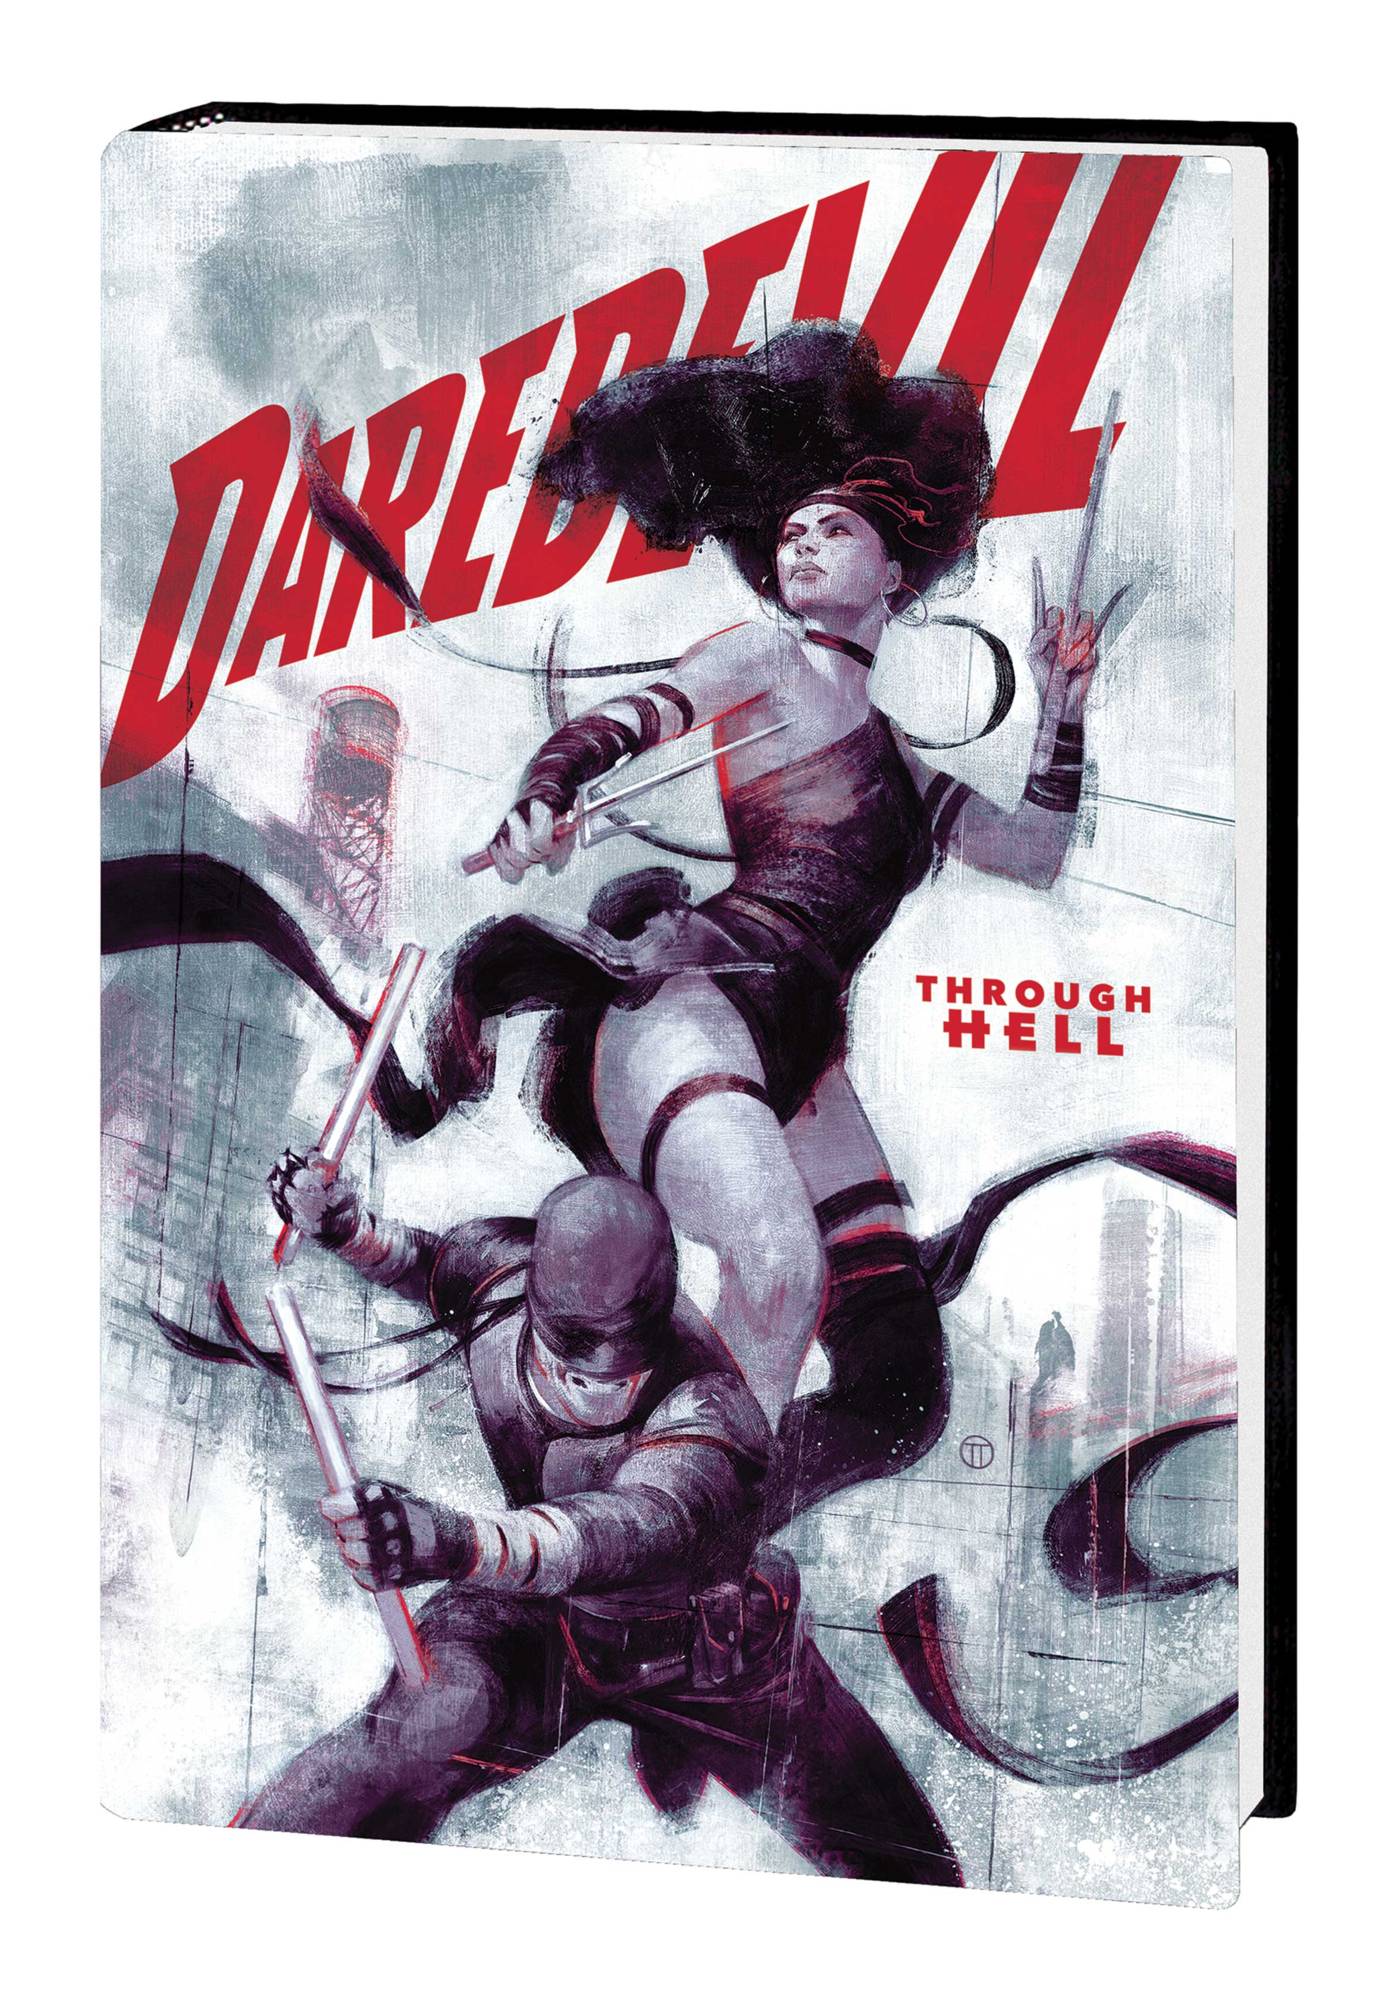 DAREDEVIL BY CHIP ZDARSKY HC VOL 02 TO HEAVEN THROUGH HELL